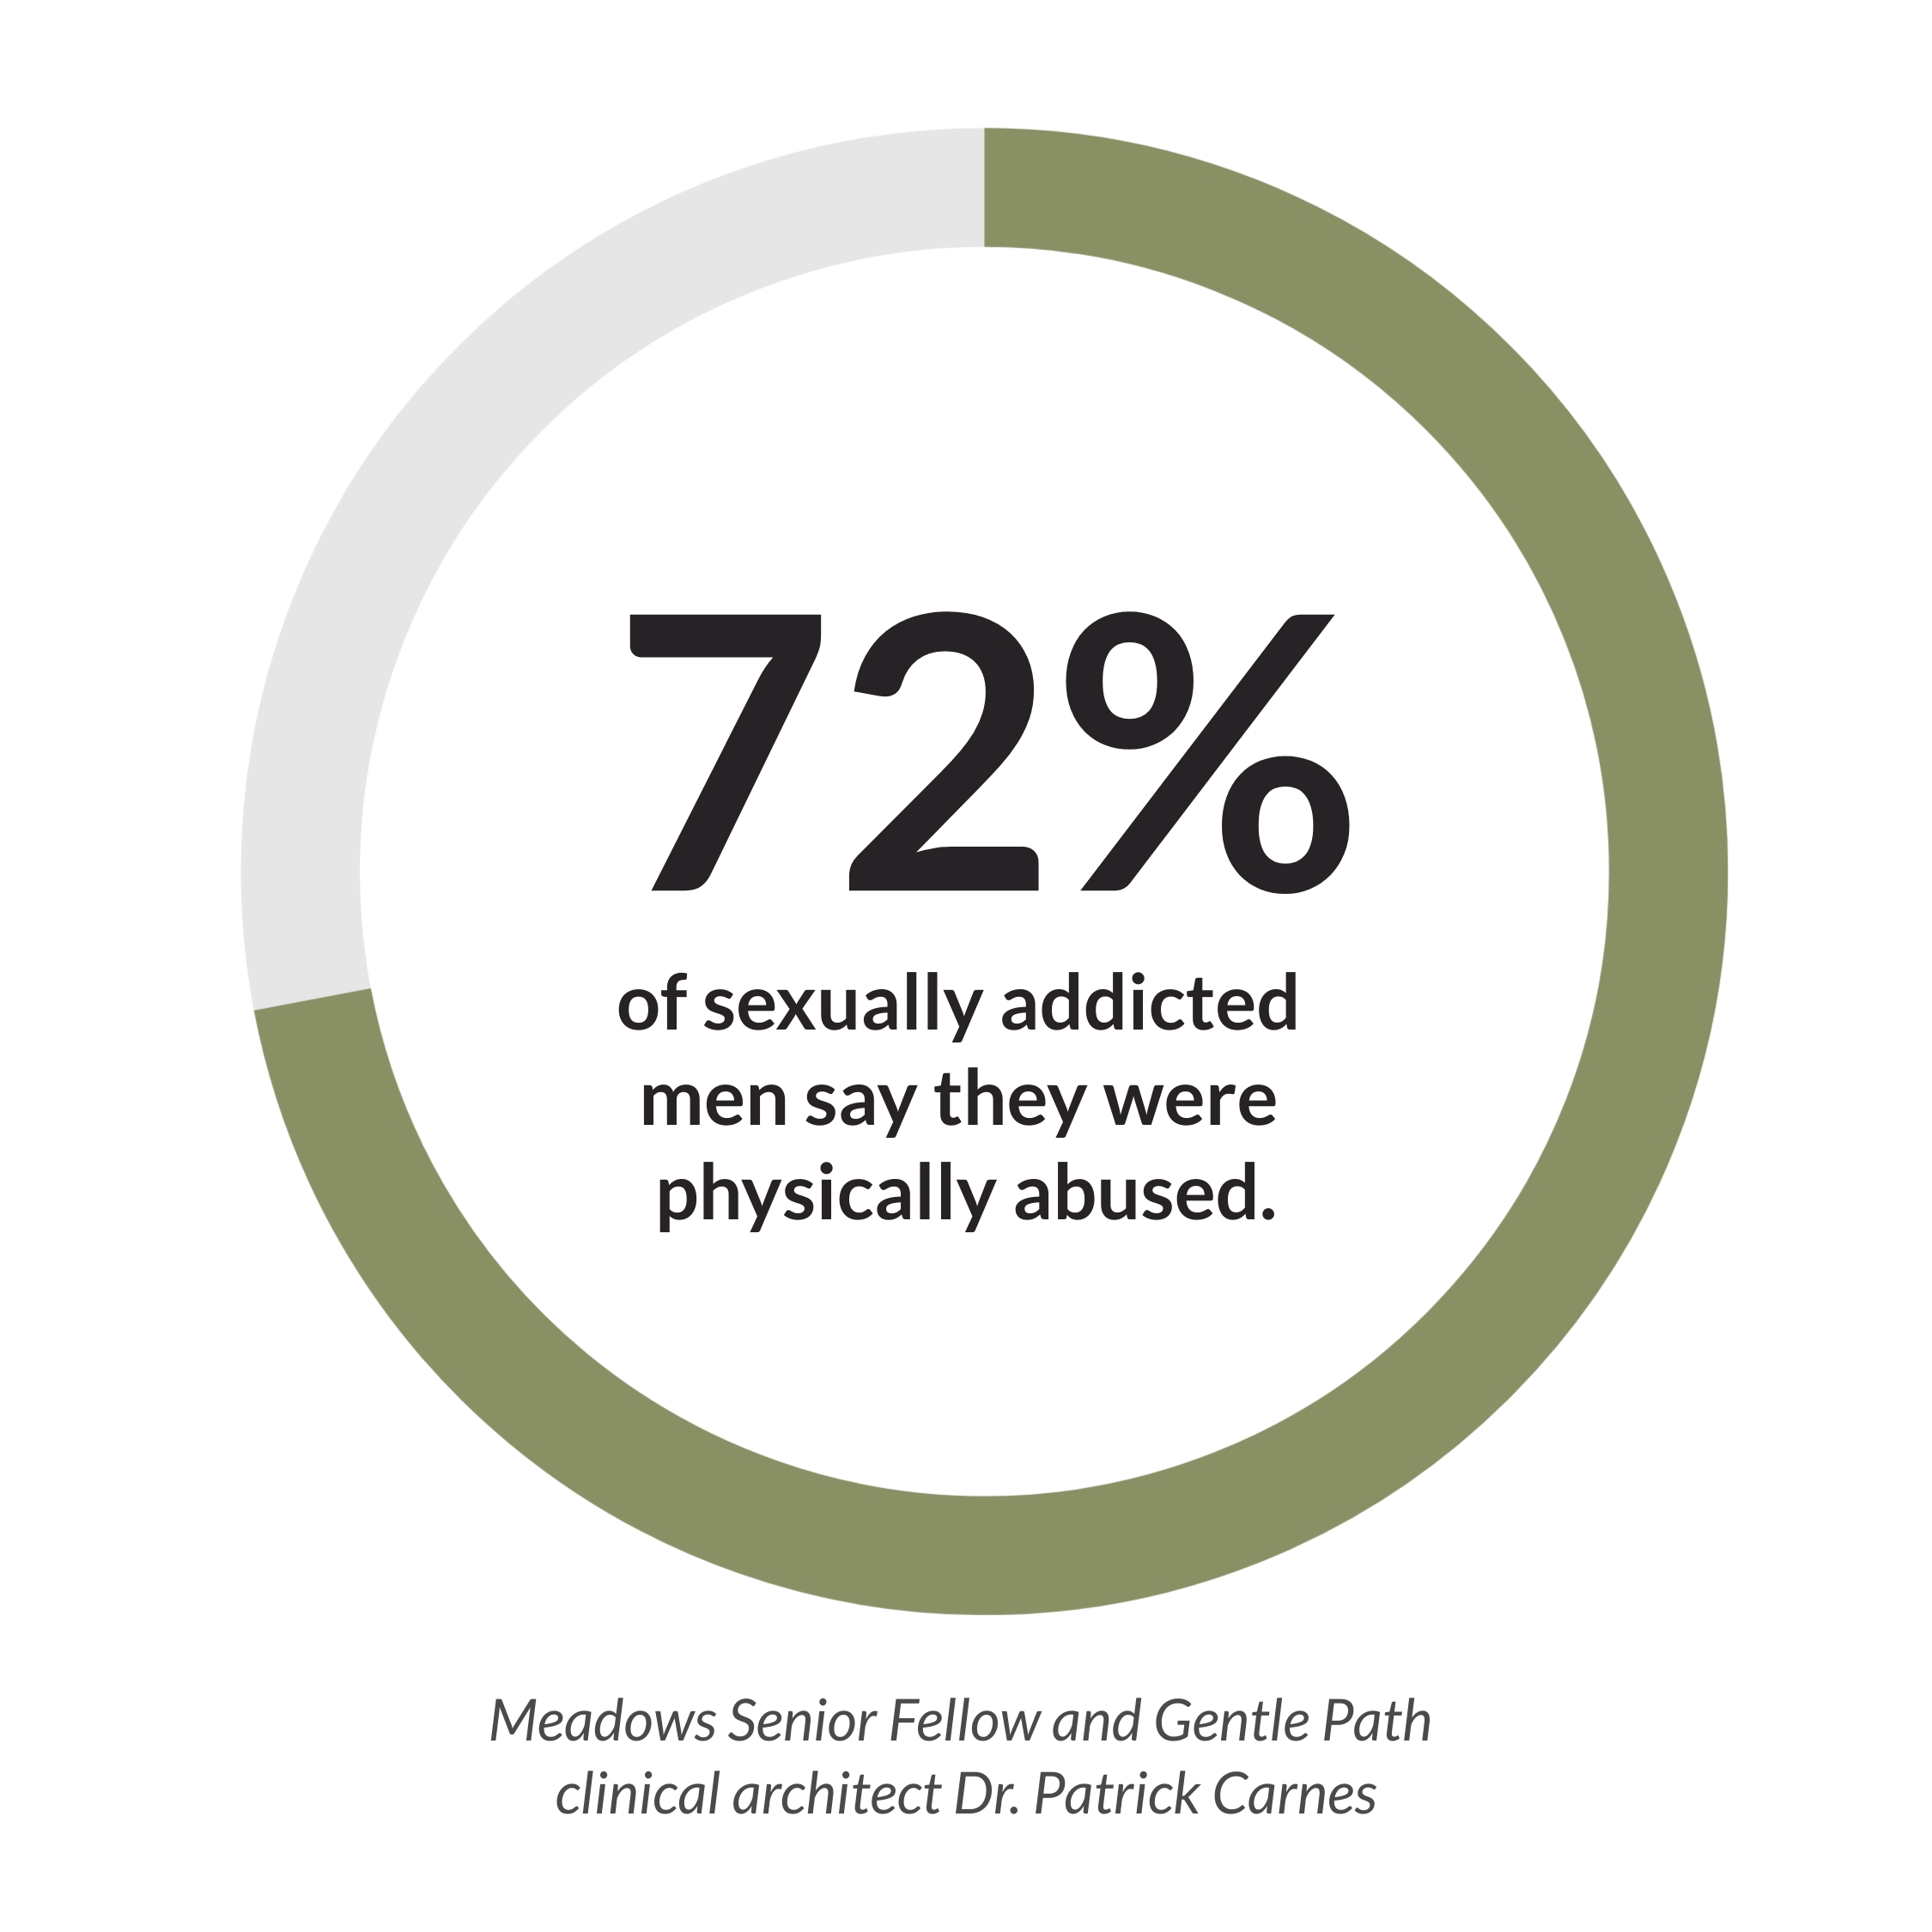 72% of sexually addicted men say they were physically abused.